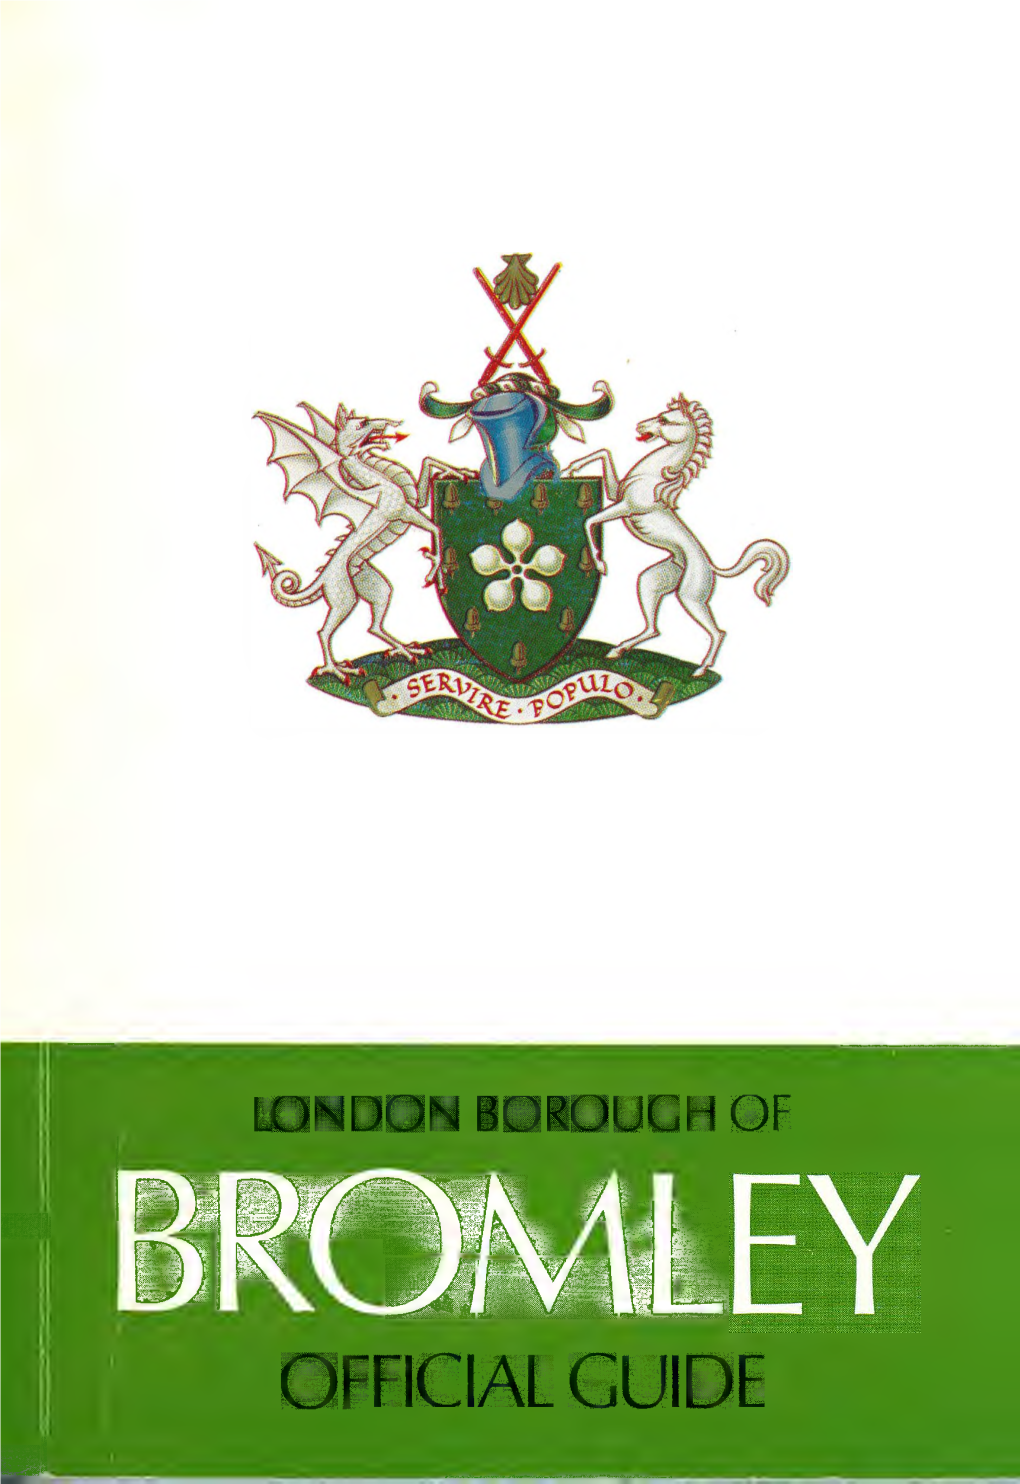 London Borough of Bromley Official Guide